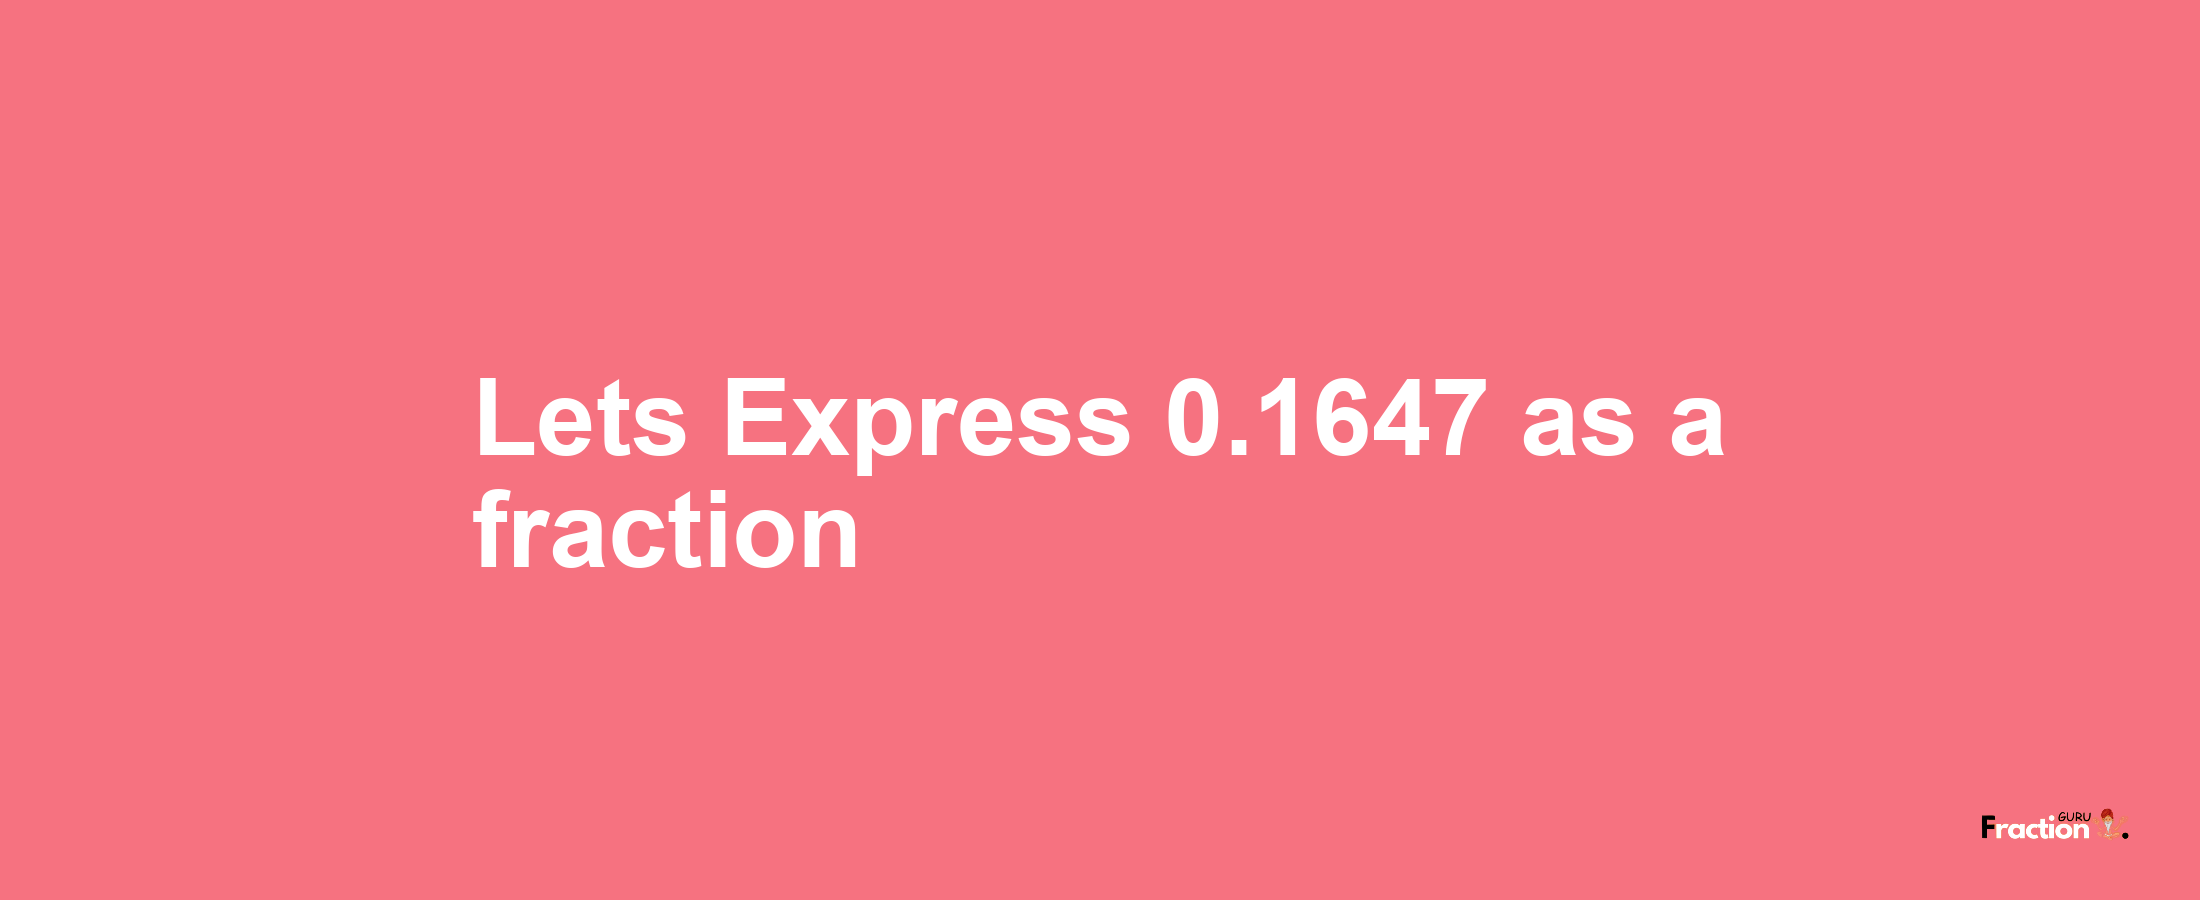 Lets Express 0.1647 as afraction